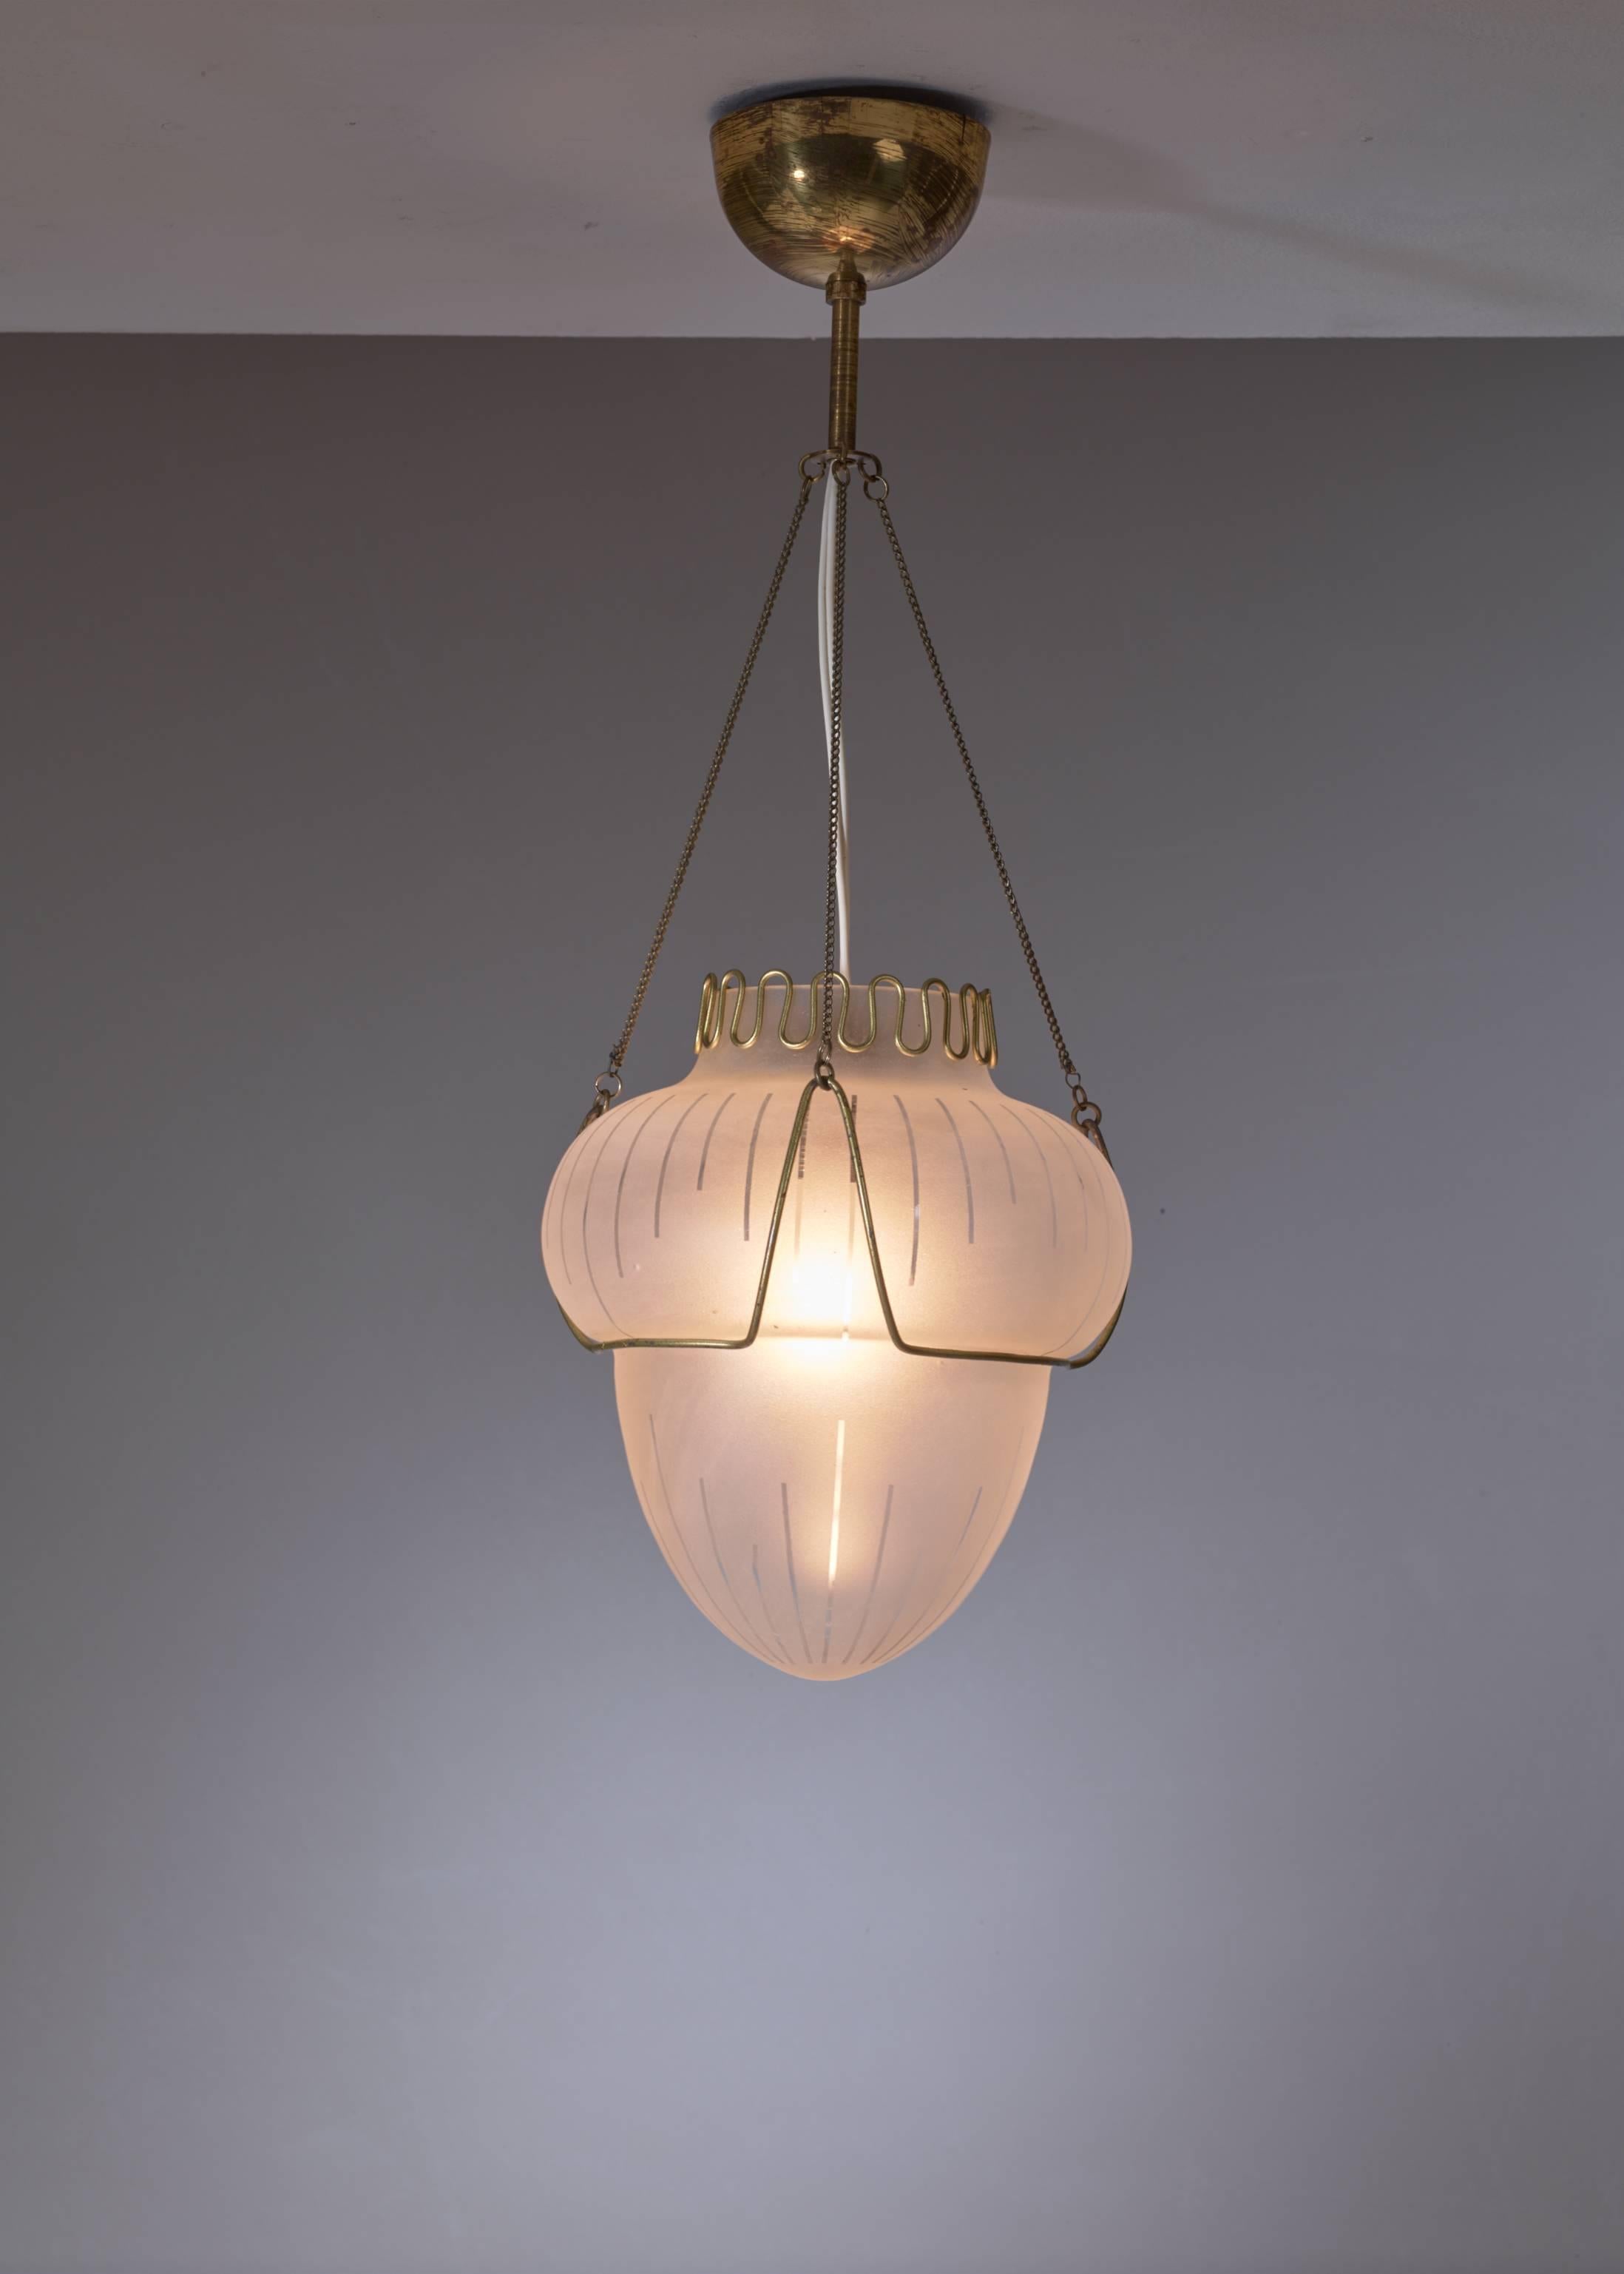 A Swedish pendant lamp made of a frosted glass shade with a striped pattern, hanging in a brass frame. The shade has a undulating brass decoration on top.
Beautiful classical pendant.

* This piece is offered to you by Bloomberry, Amsterdam *